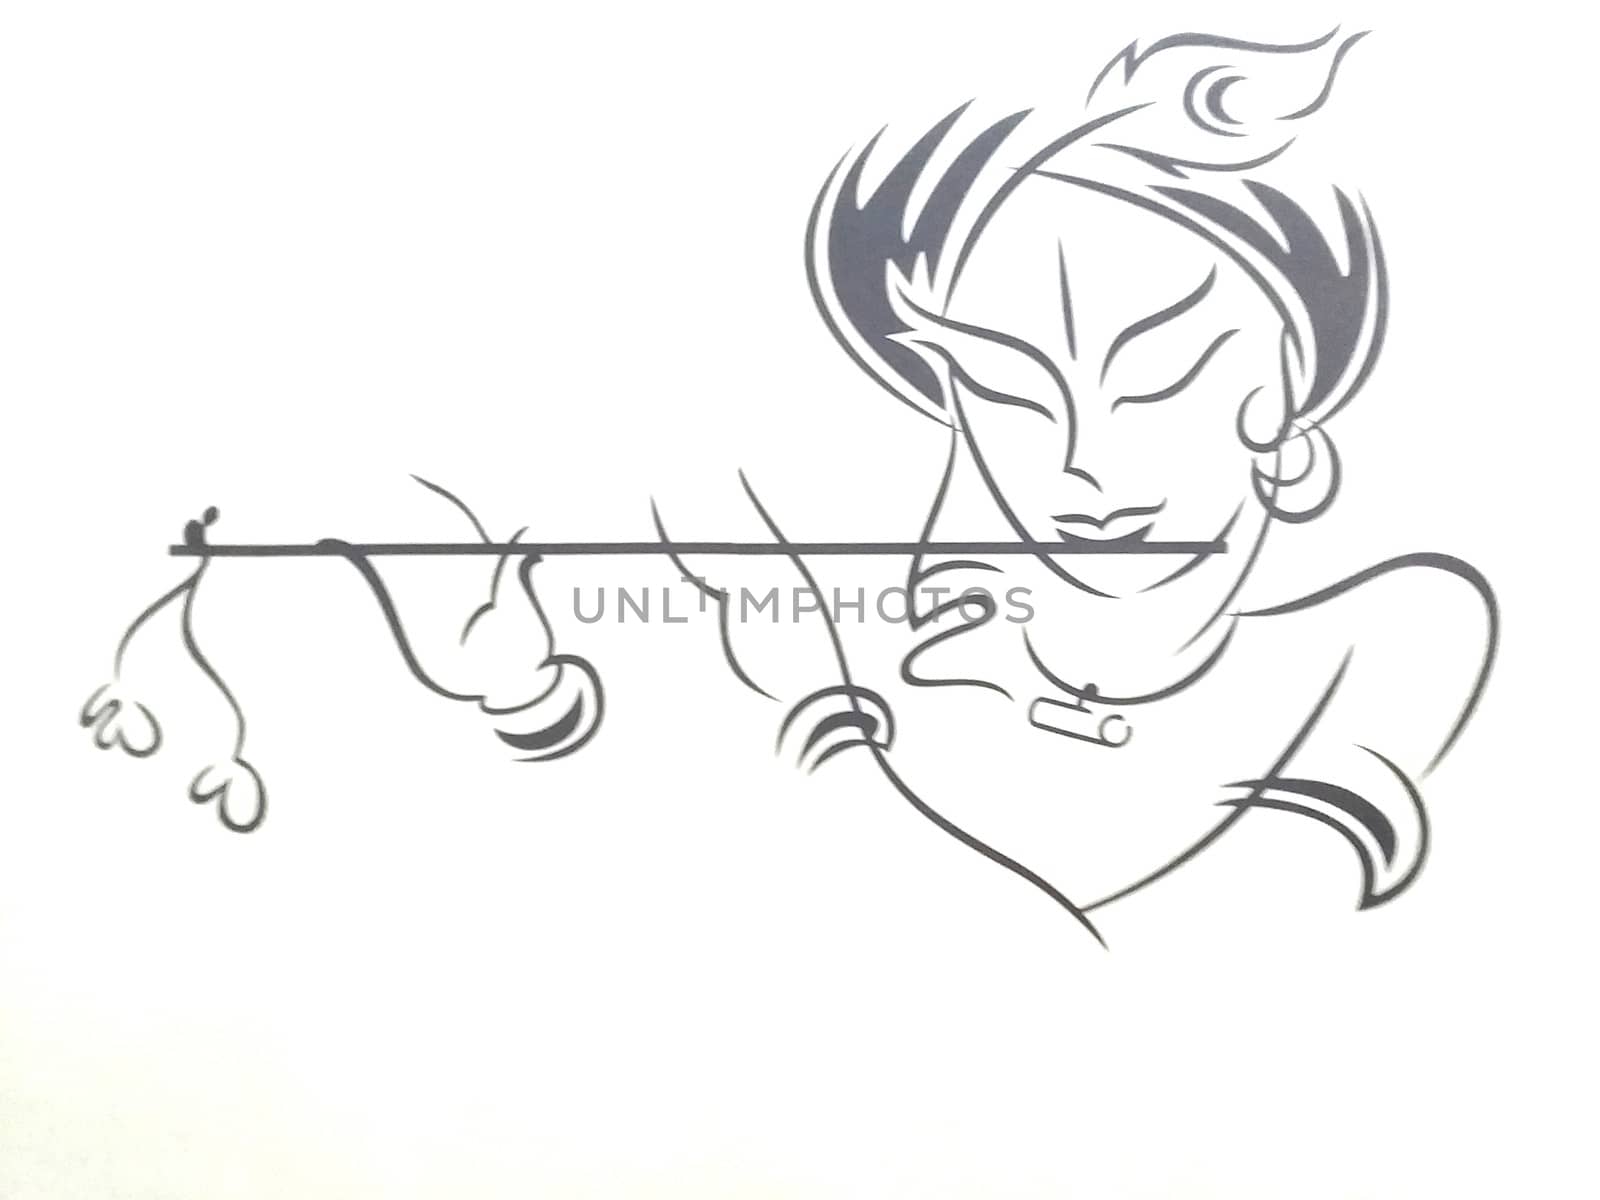 sketch of lord Krishna on the wall by gswagh71